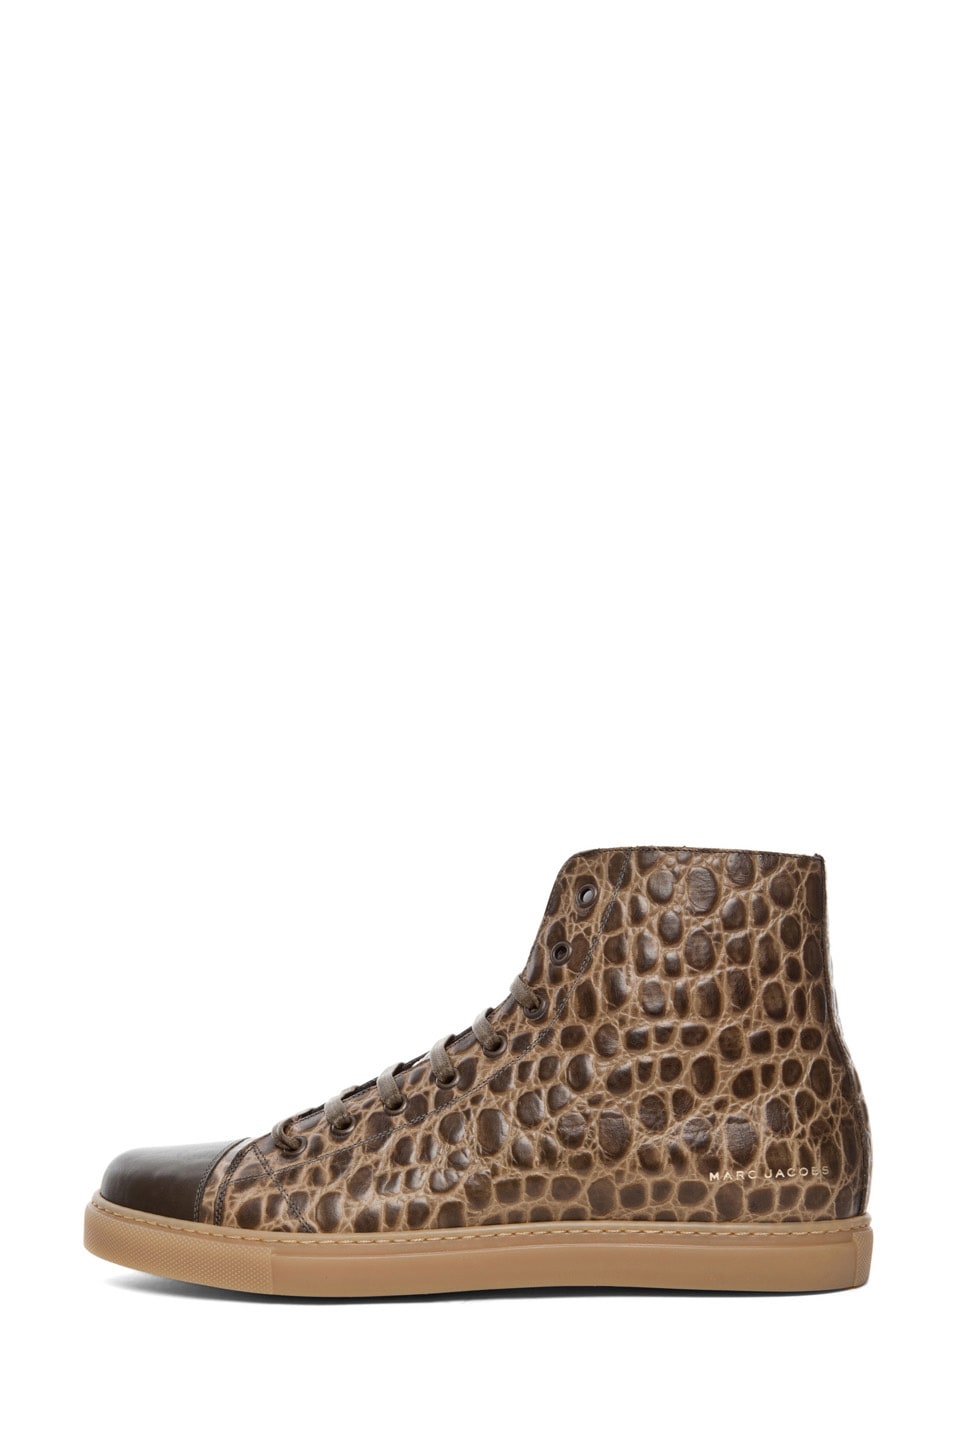 Image 1 of Marc Jacobs Croc Print High Top Sneaker in Olive